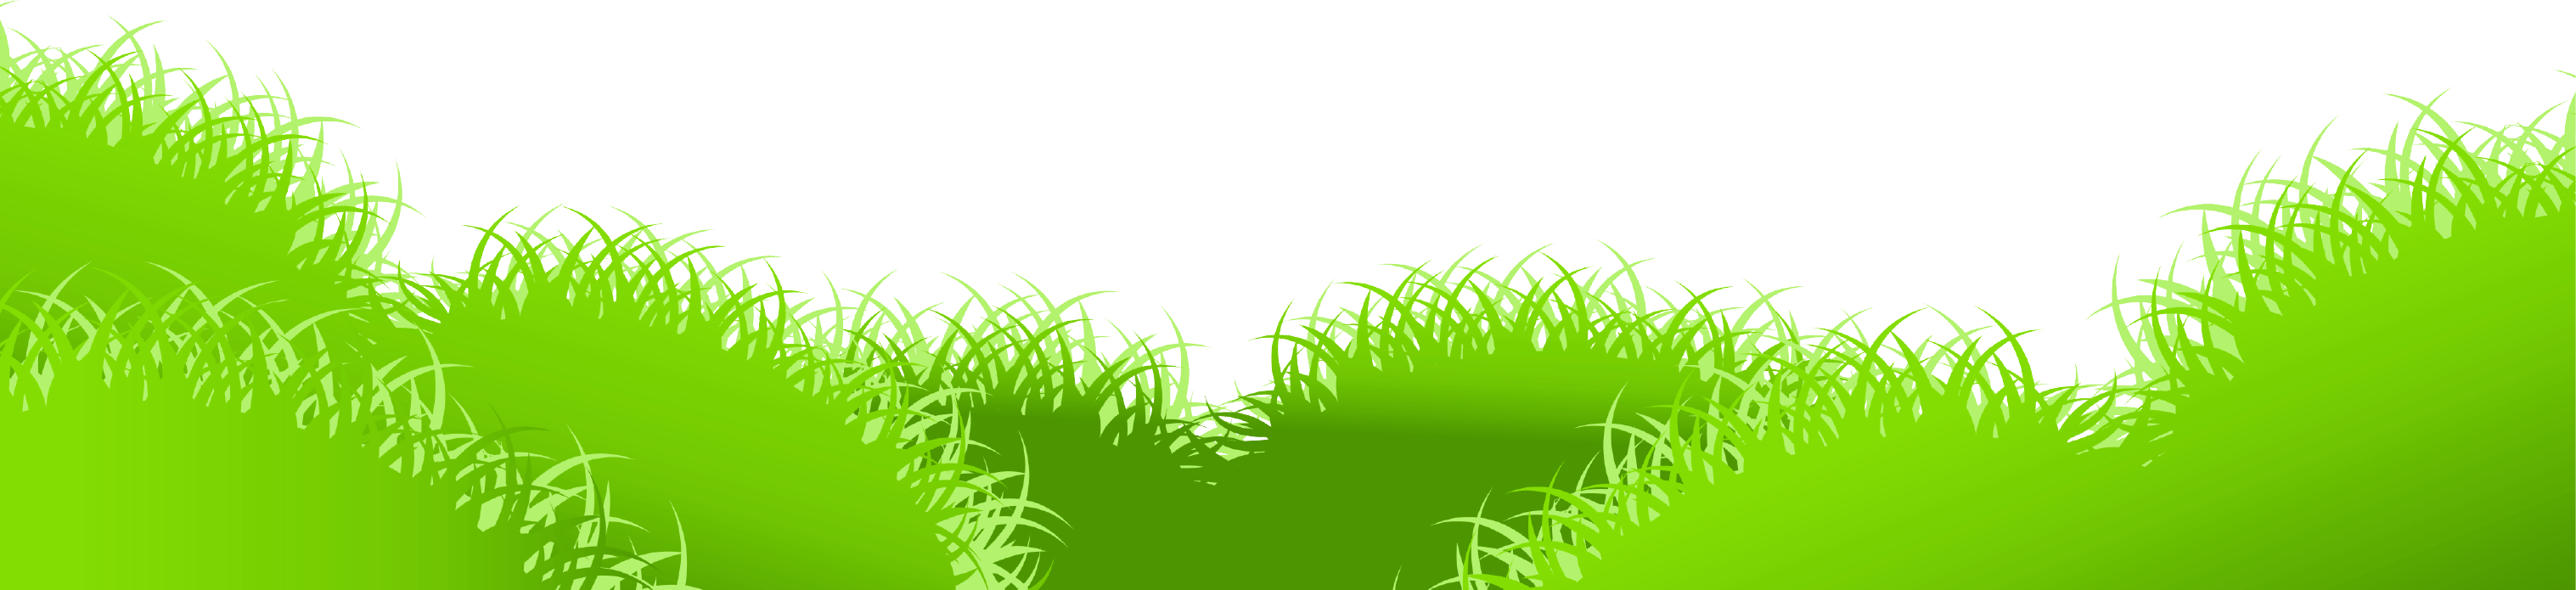 png clipart grass - photo #38